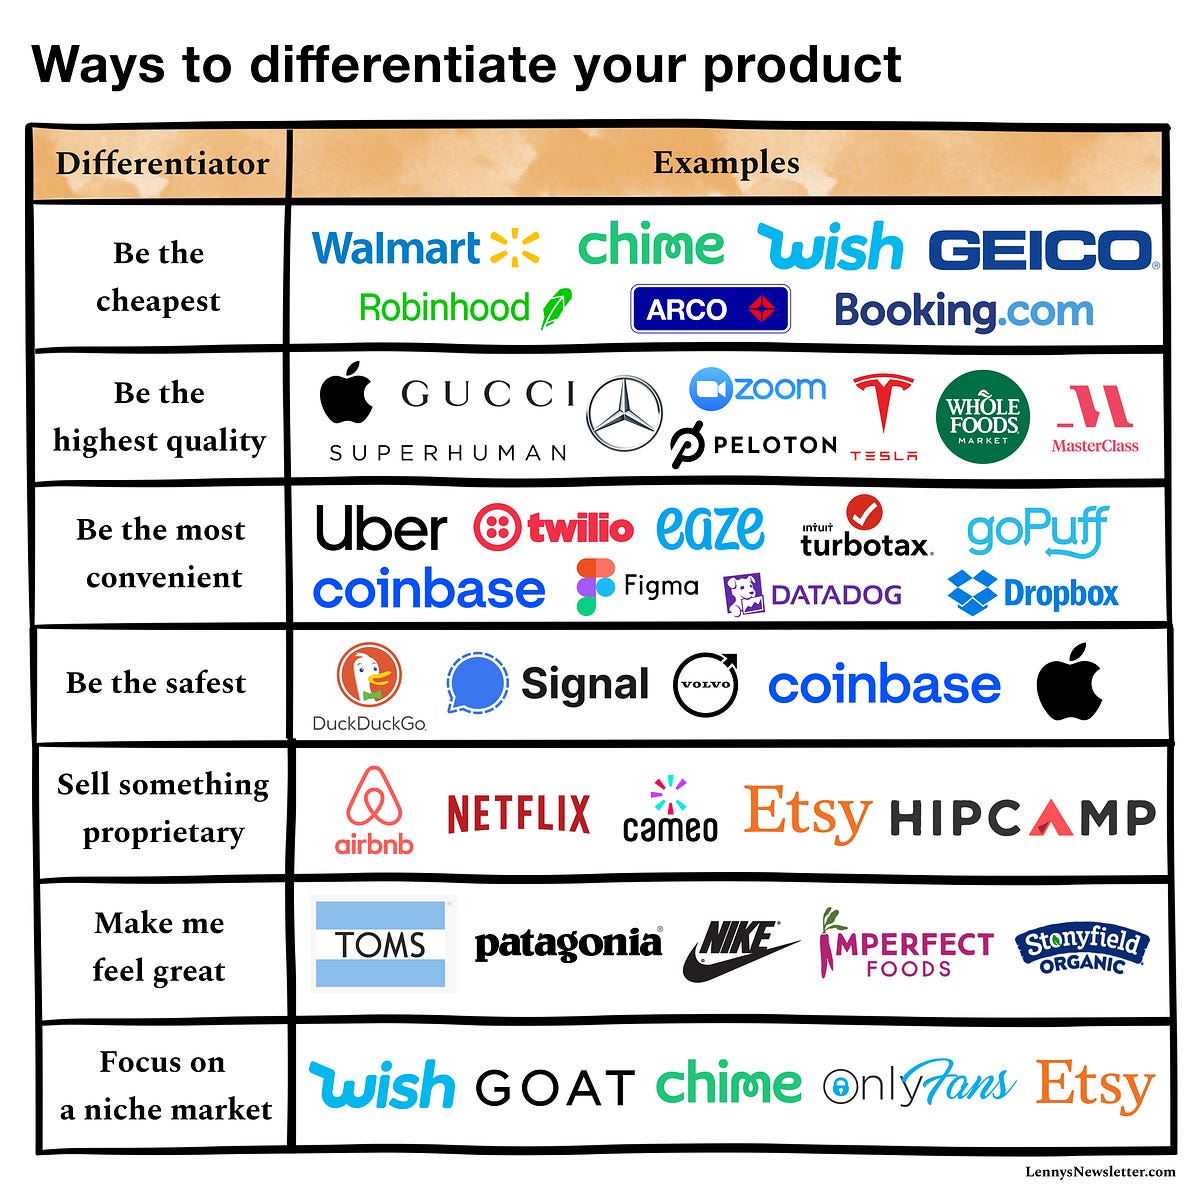 Differentiating your product